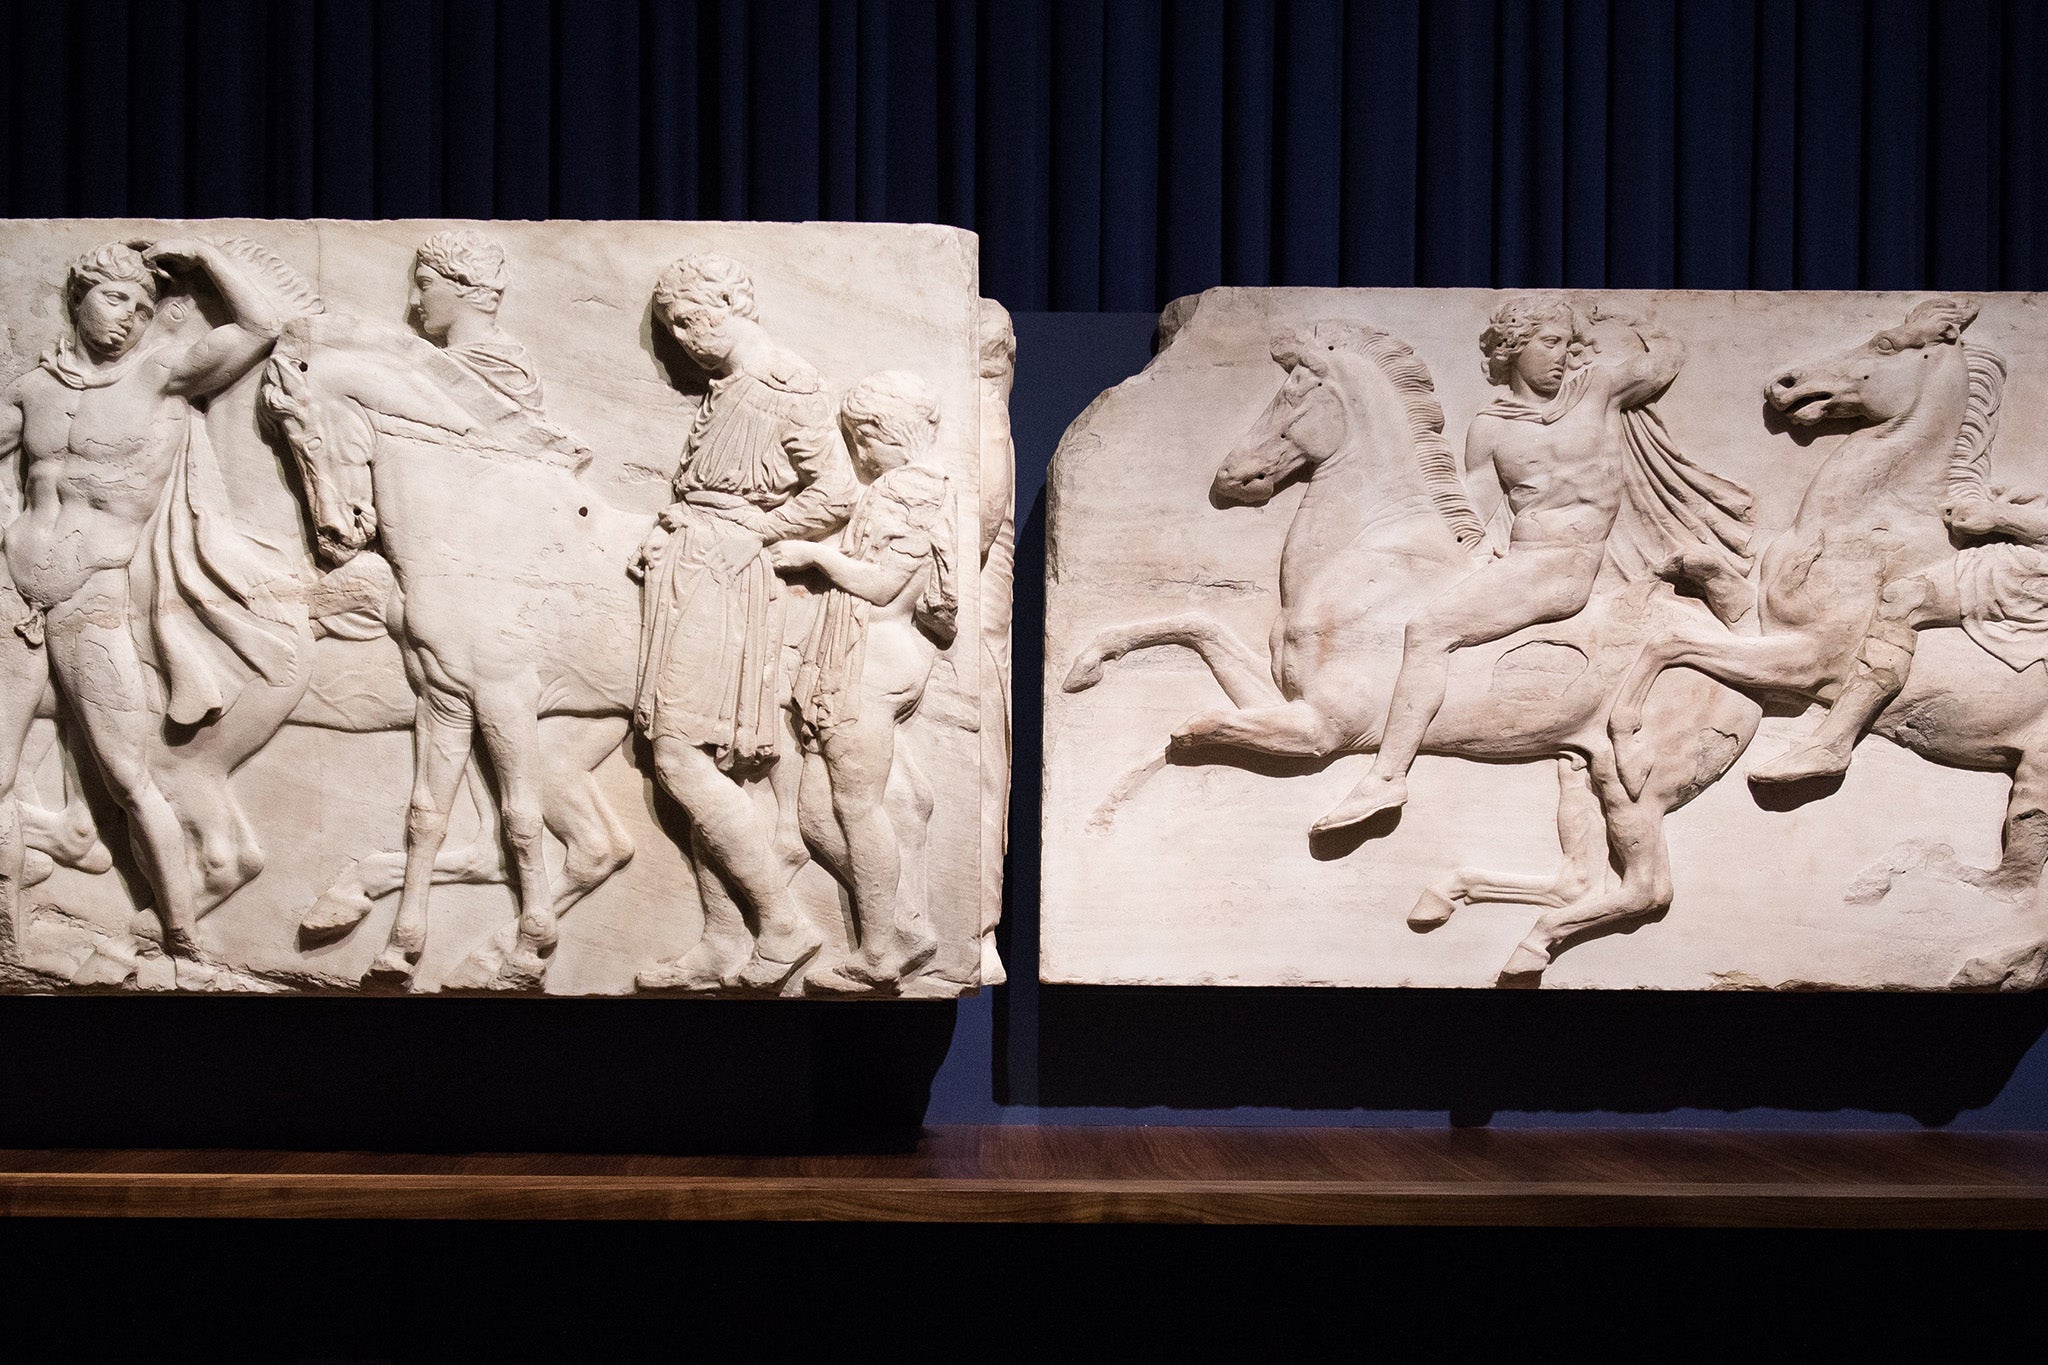 Sections of an 80-metre frieze from the Parthenon were brought to London by Lord Elgin in the nineteenth century